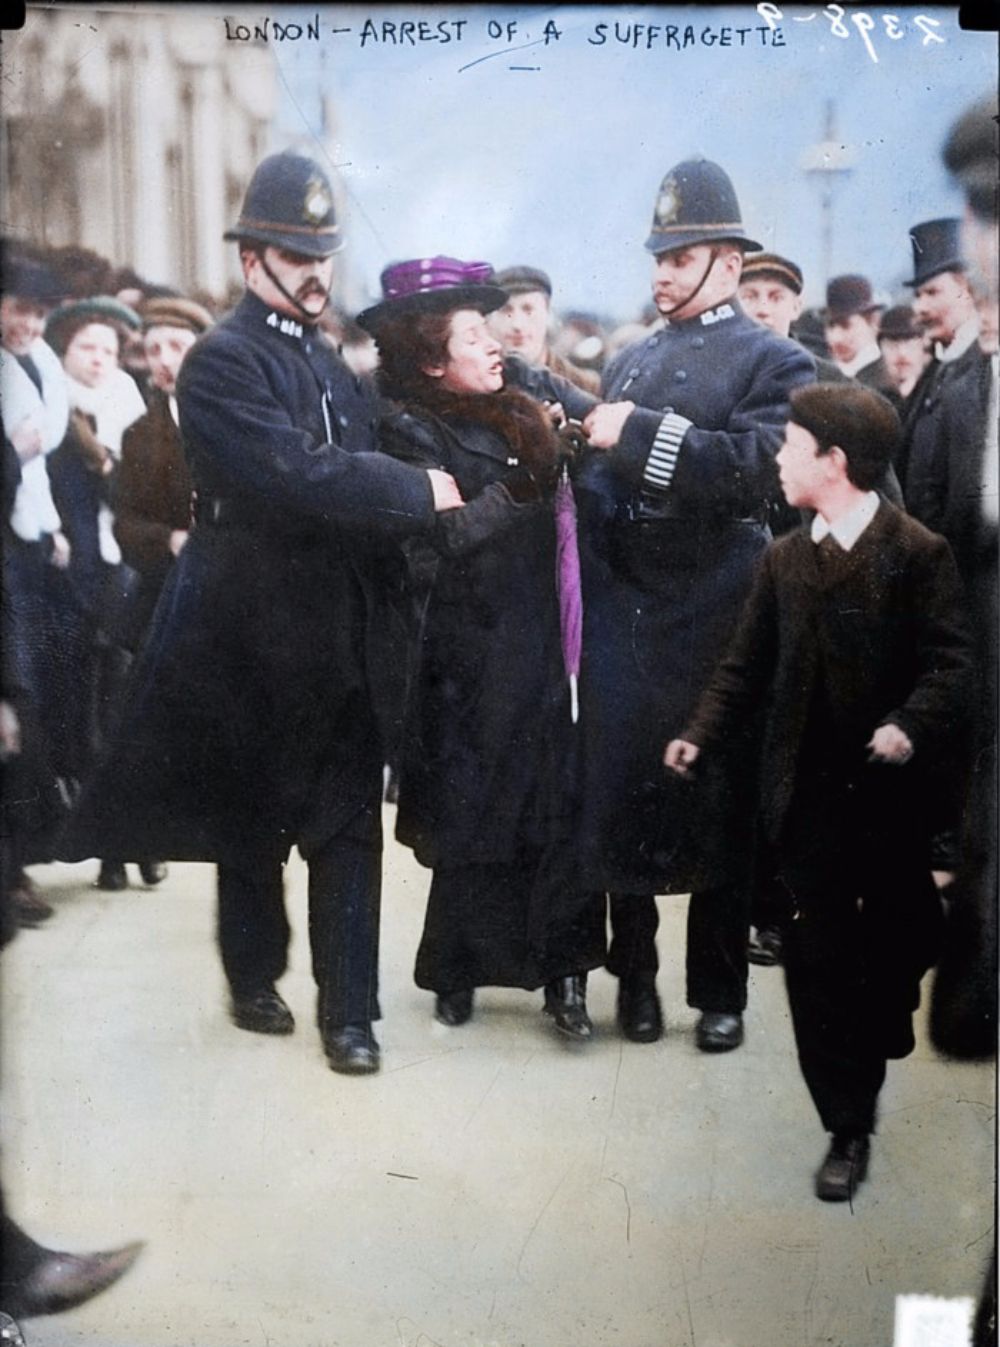 suffragettes-in-color-striking-images-show-the-militant-campaign-for